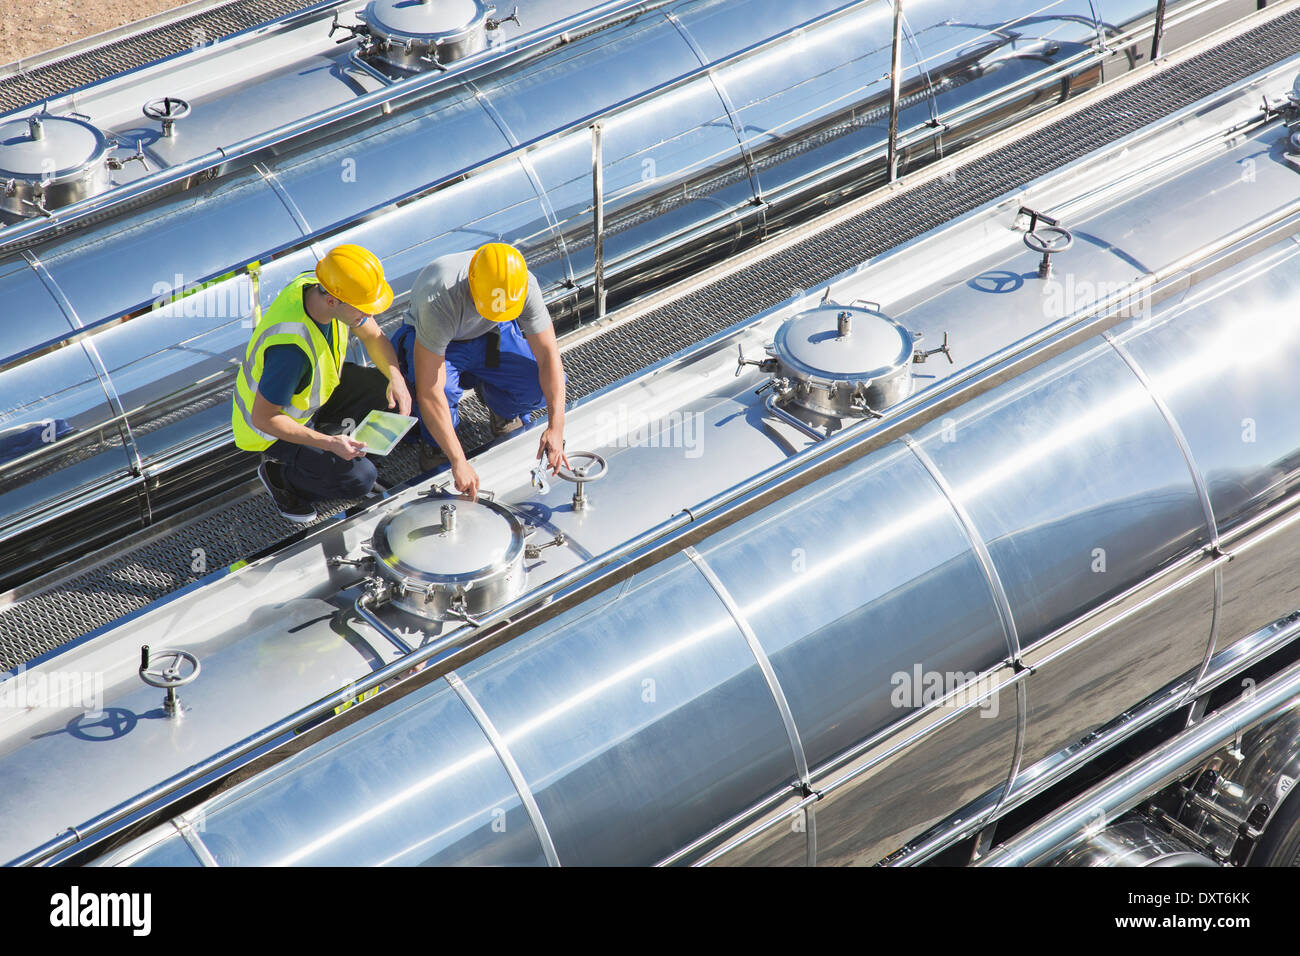 Workers on platform above stainless steel milk tanker Stock Photo